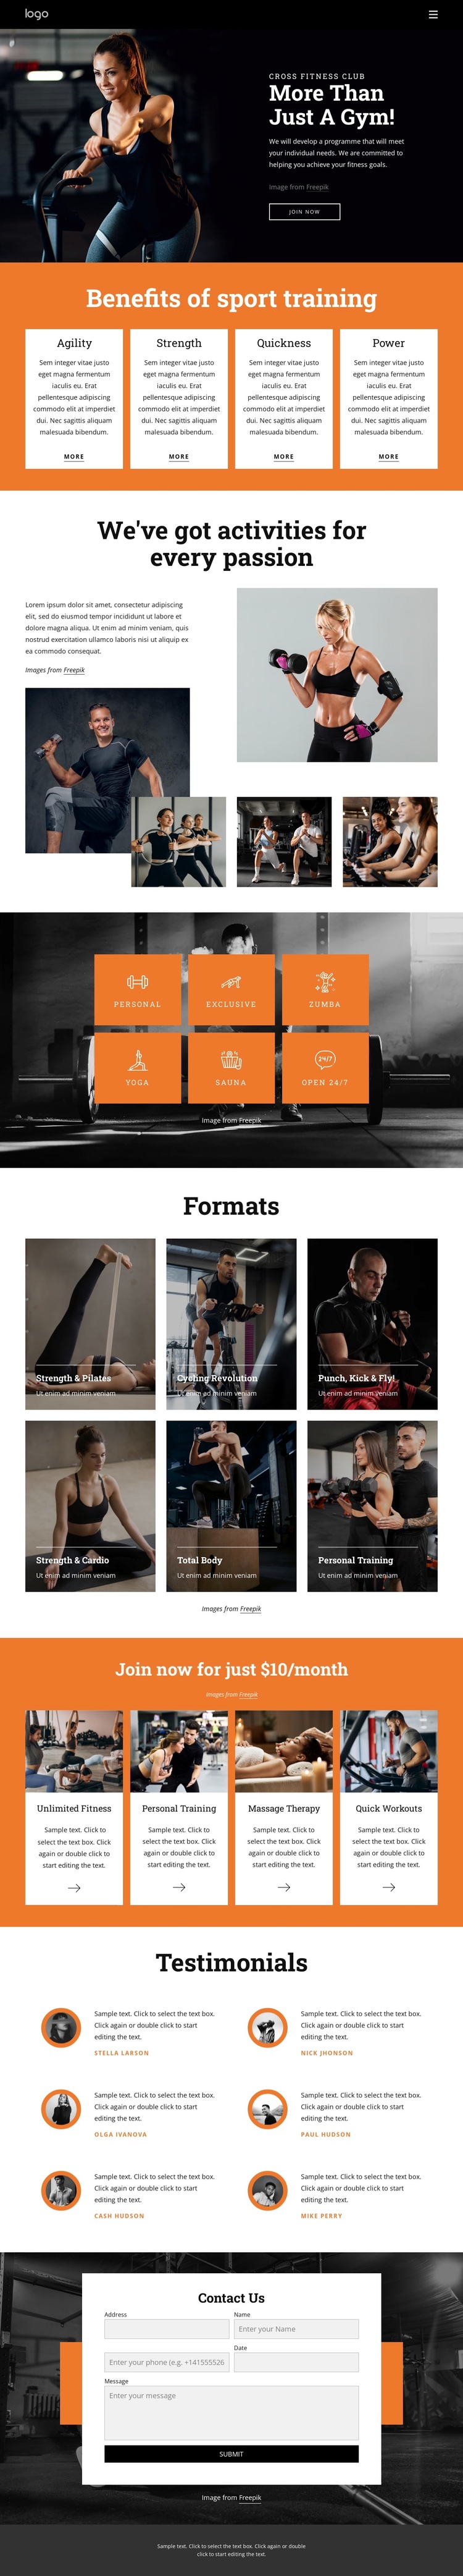 Join our community of fitness enthusiasts Website Builder Software